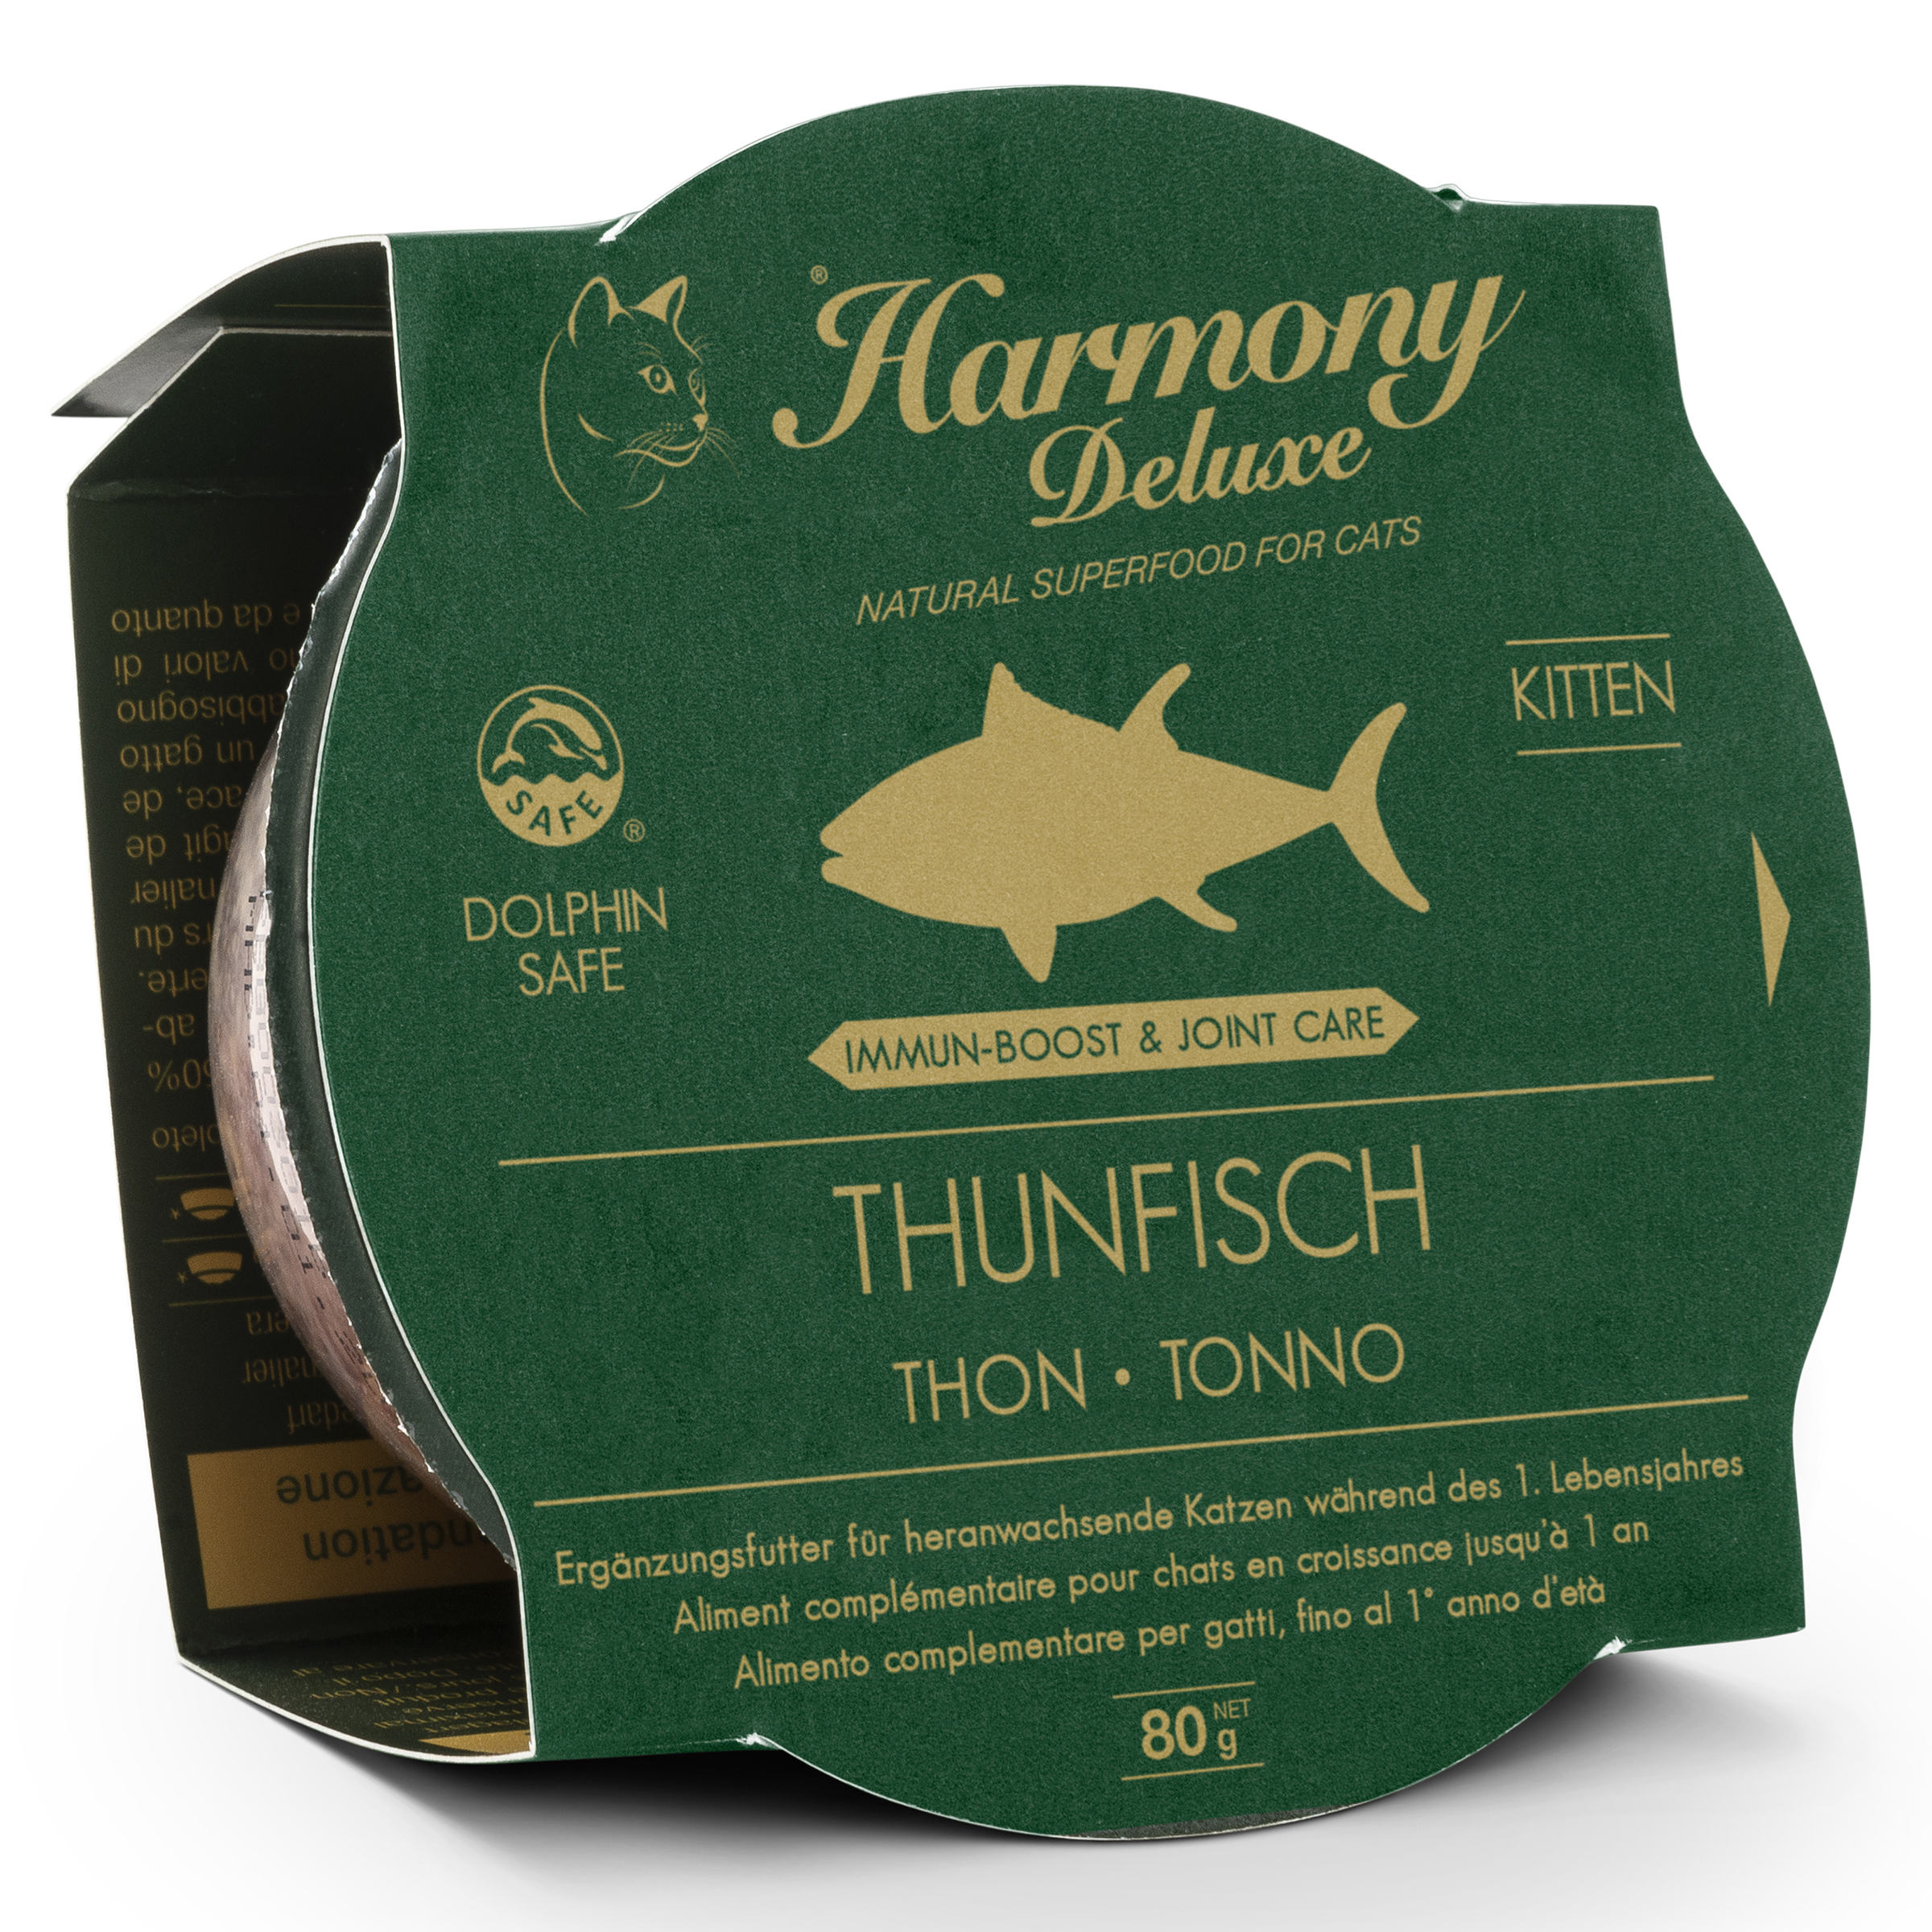 Harmony Cat Deluxe Cup Kitten Thunfisch Immun-Boost & Care